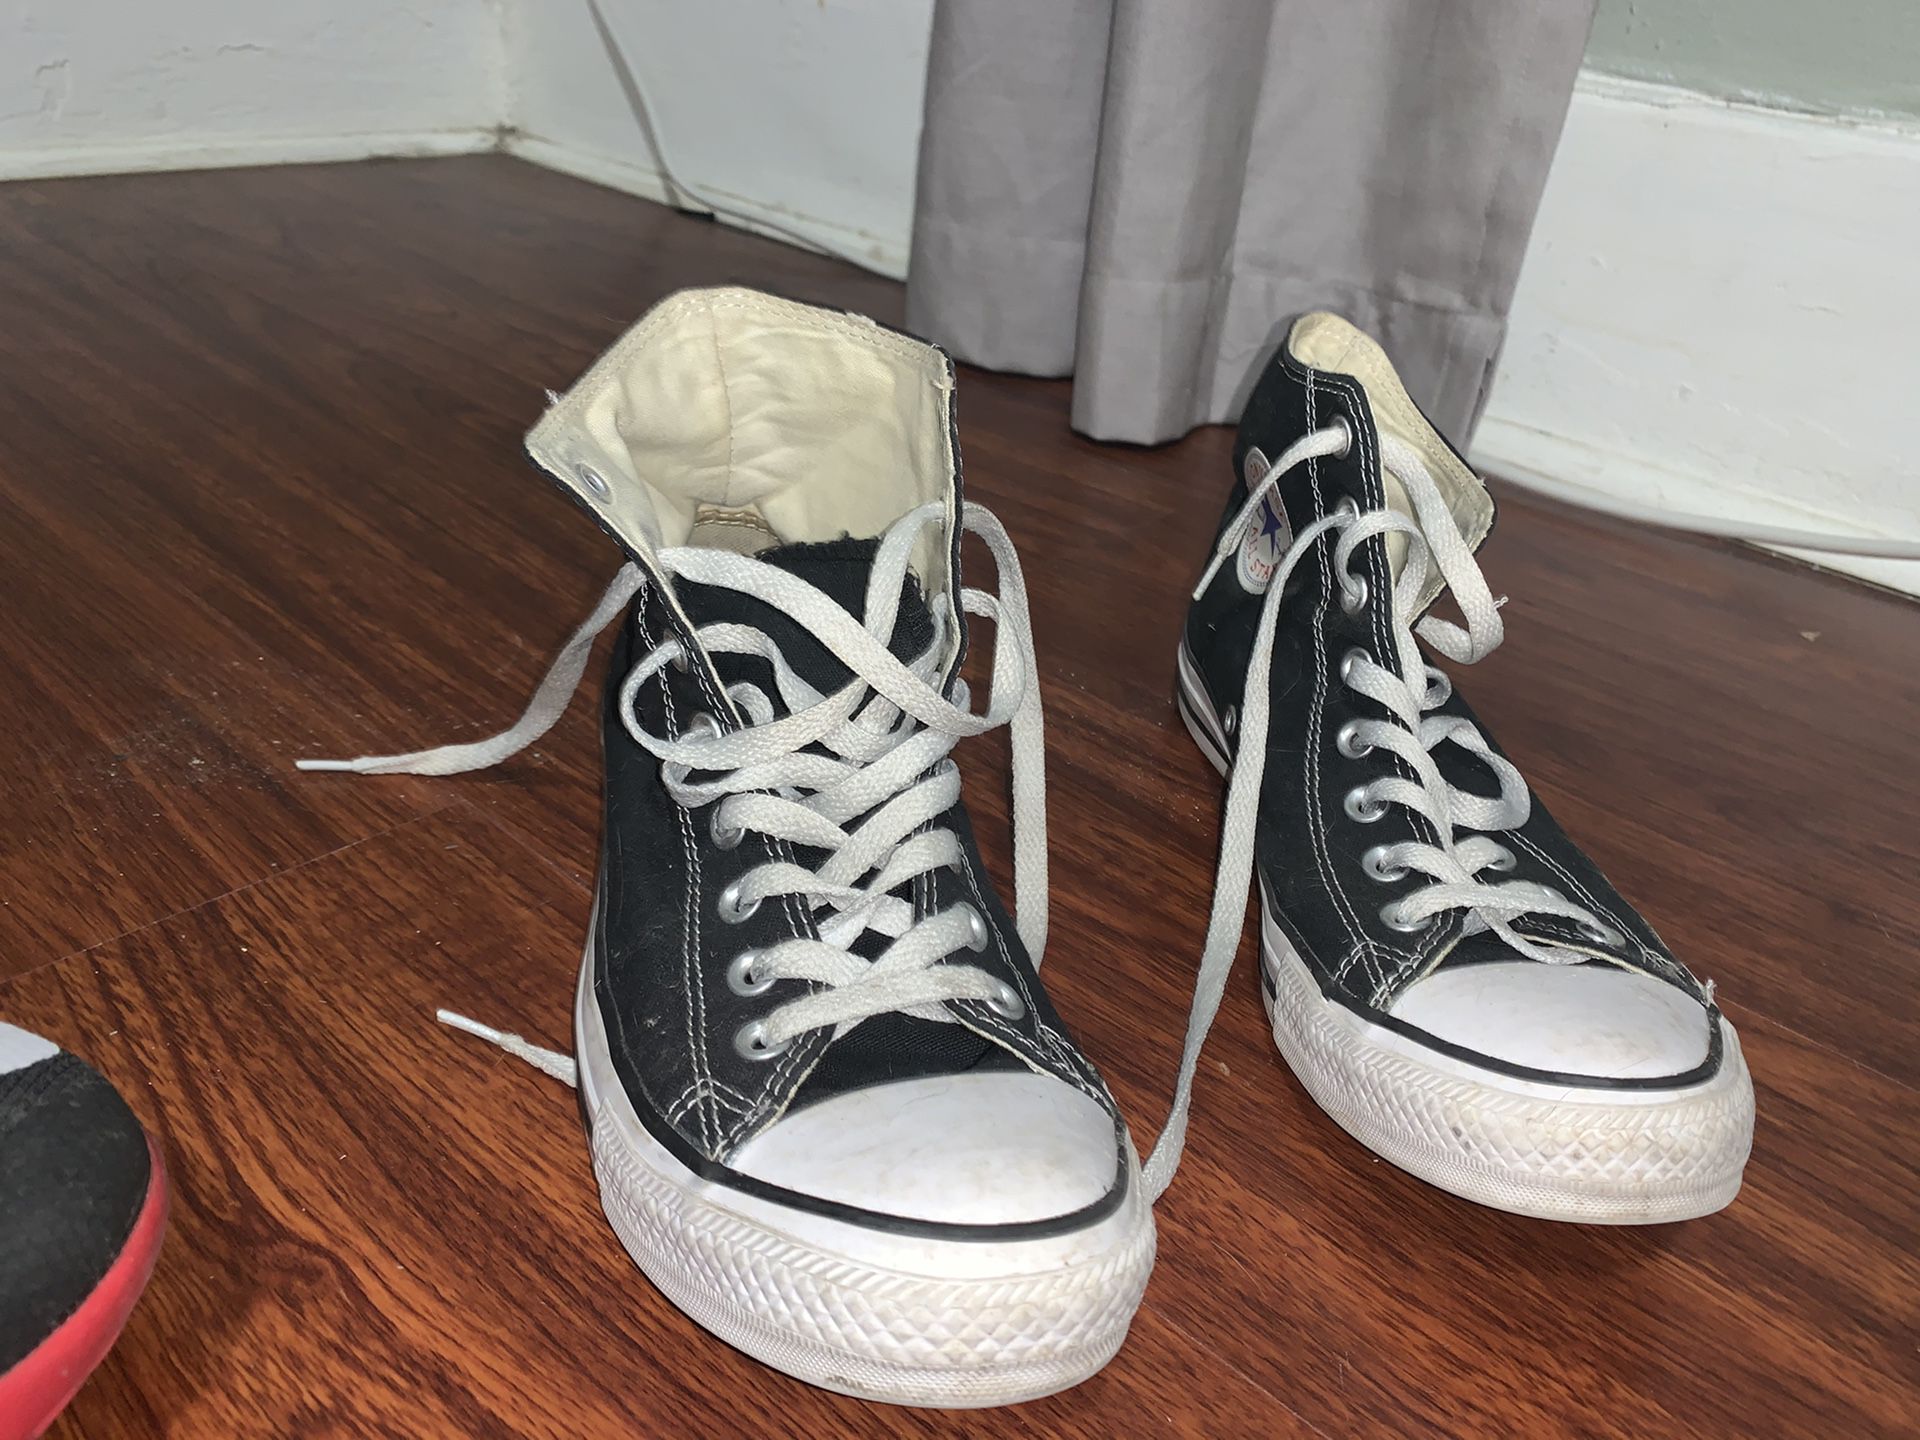 Size 8.5 converse Hardly worn. Just getting rid of extra closet space